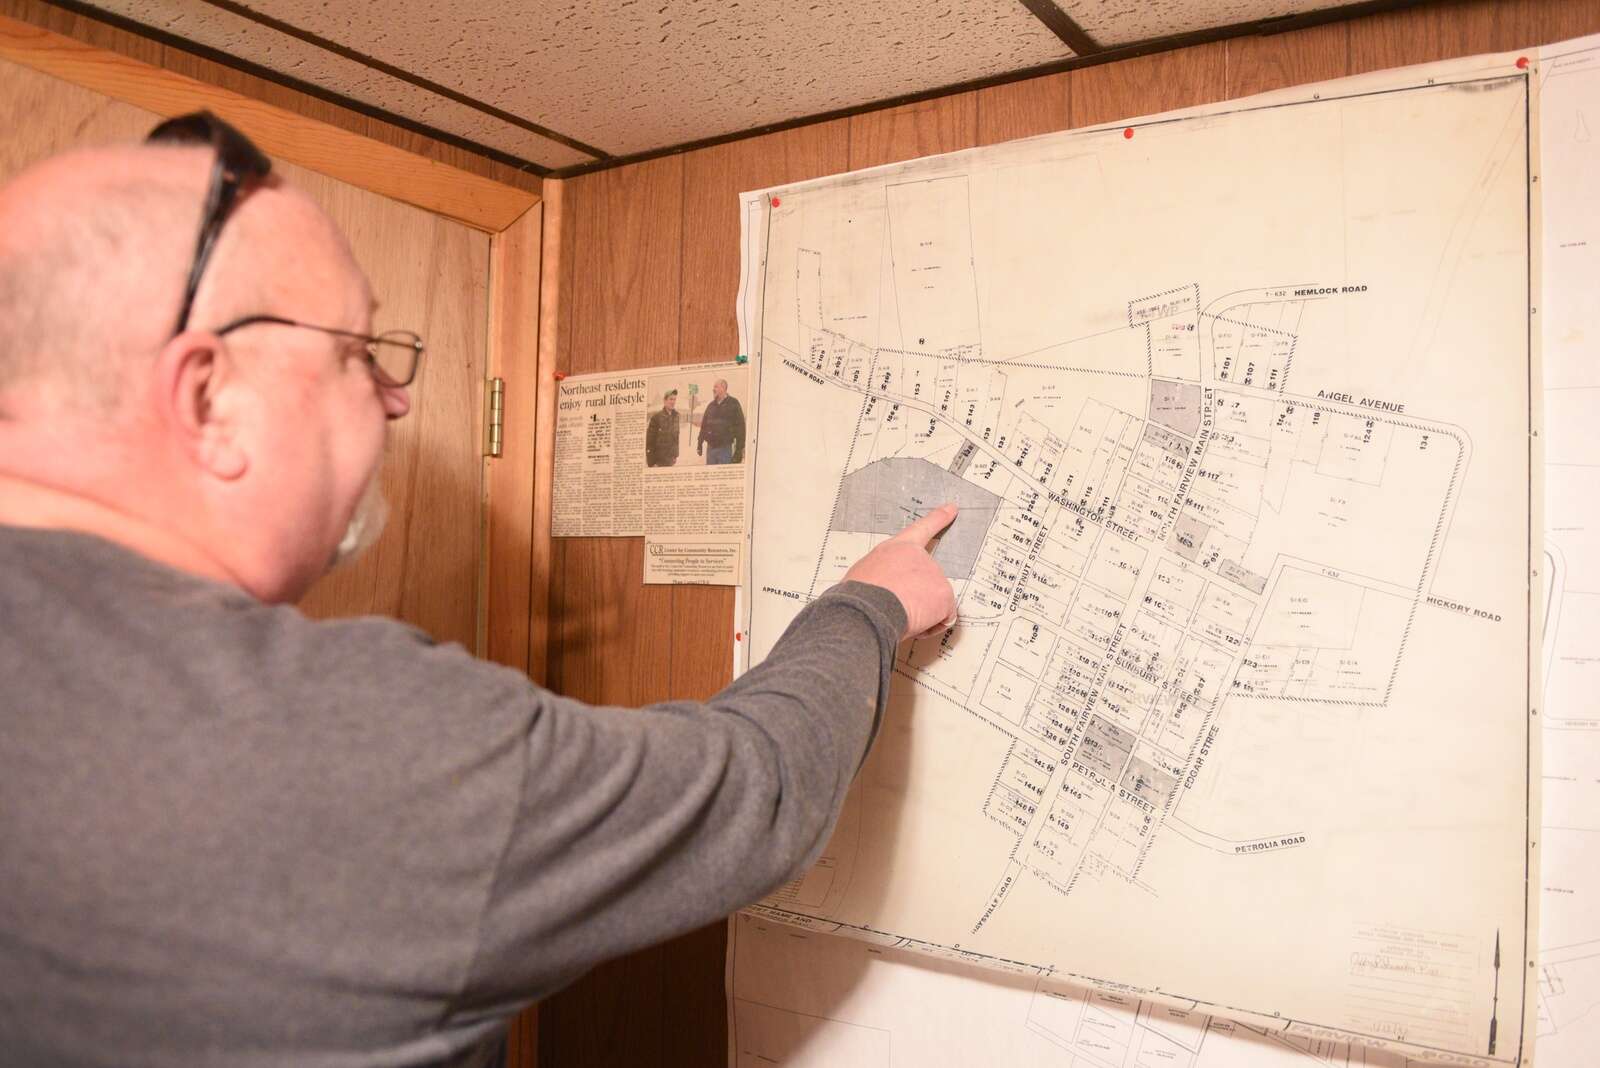 Jeff Shumaker points to a map of Fairview